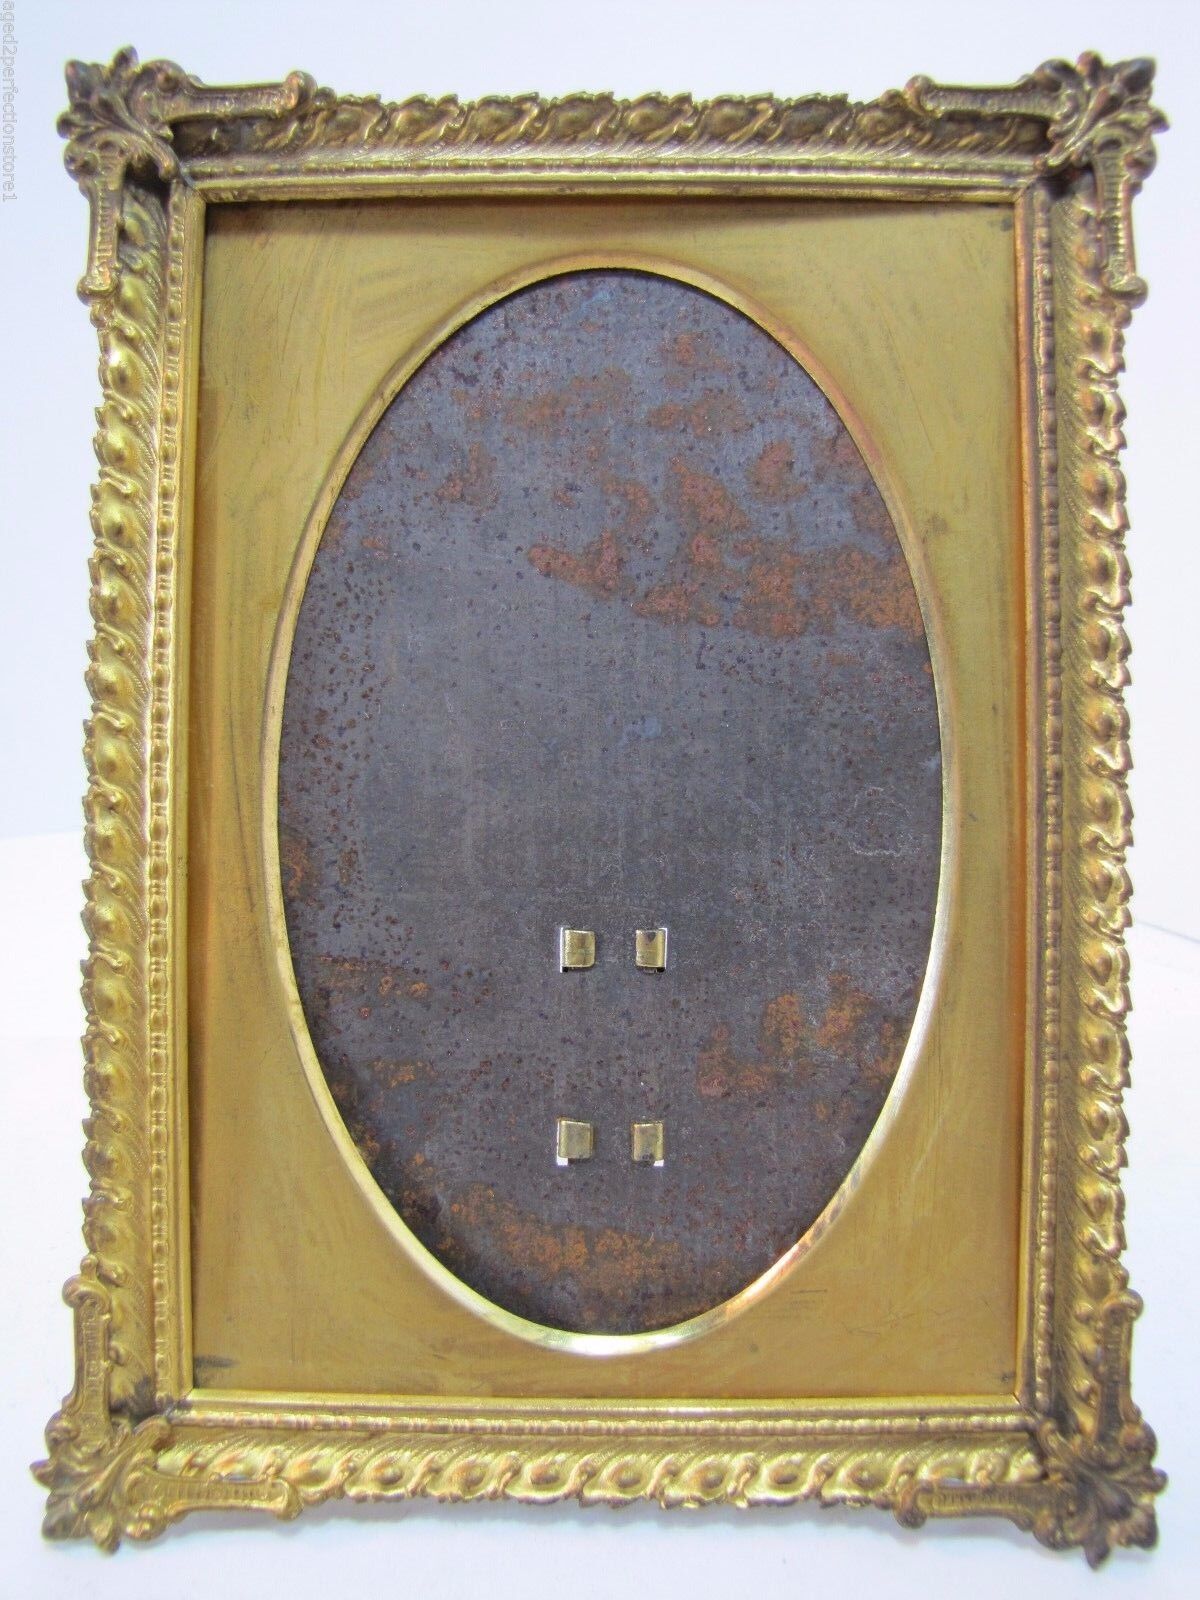 Antique Ornate Brass Picture Frame exquisite fine detailing turn of century 1900